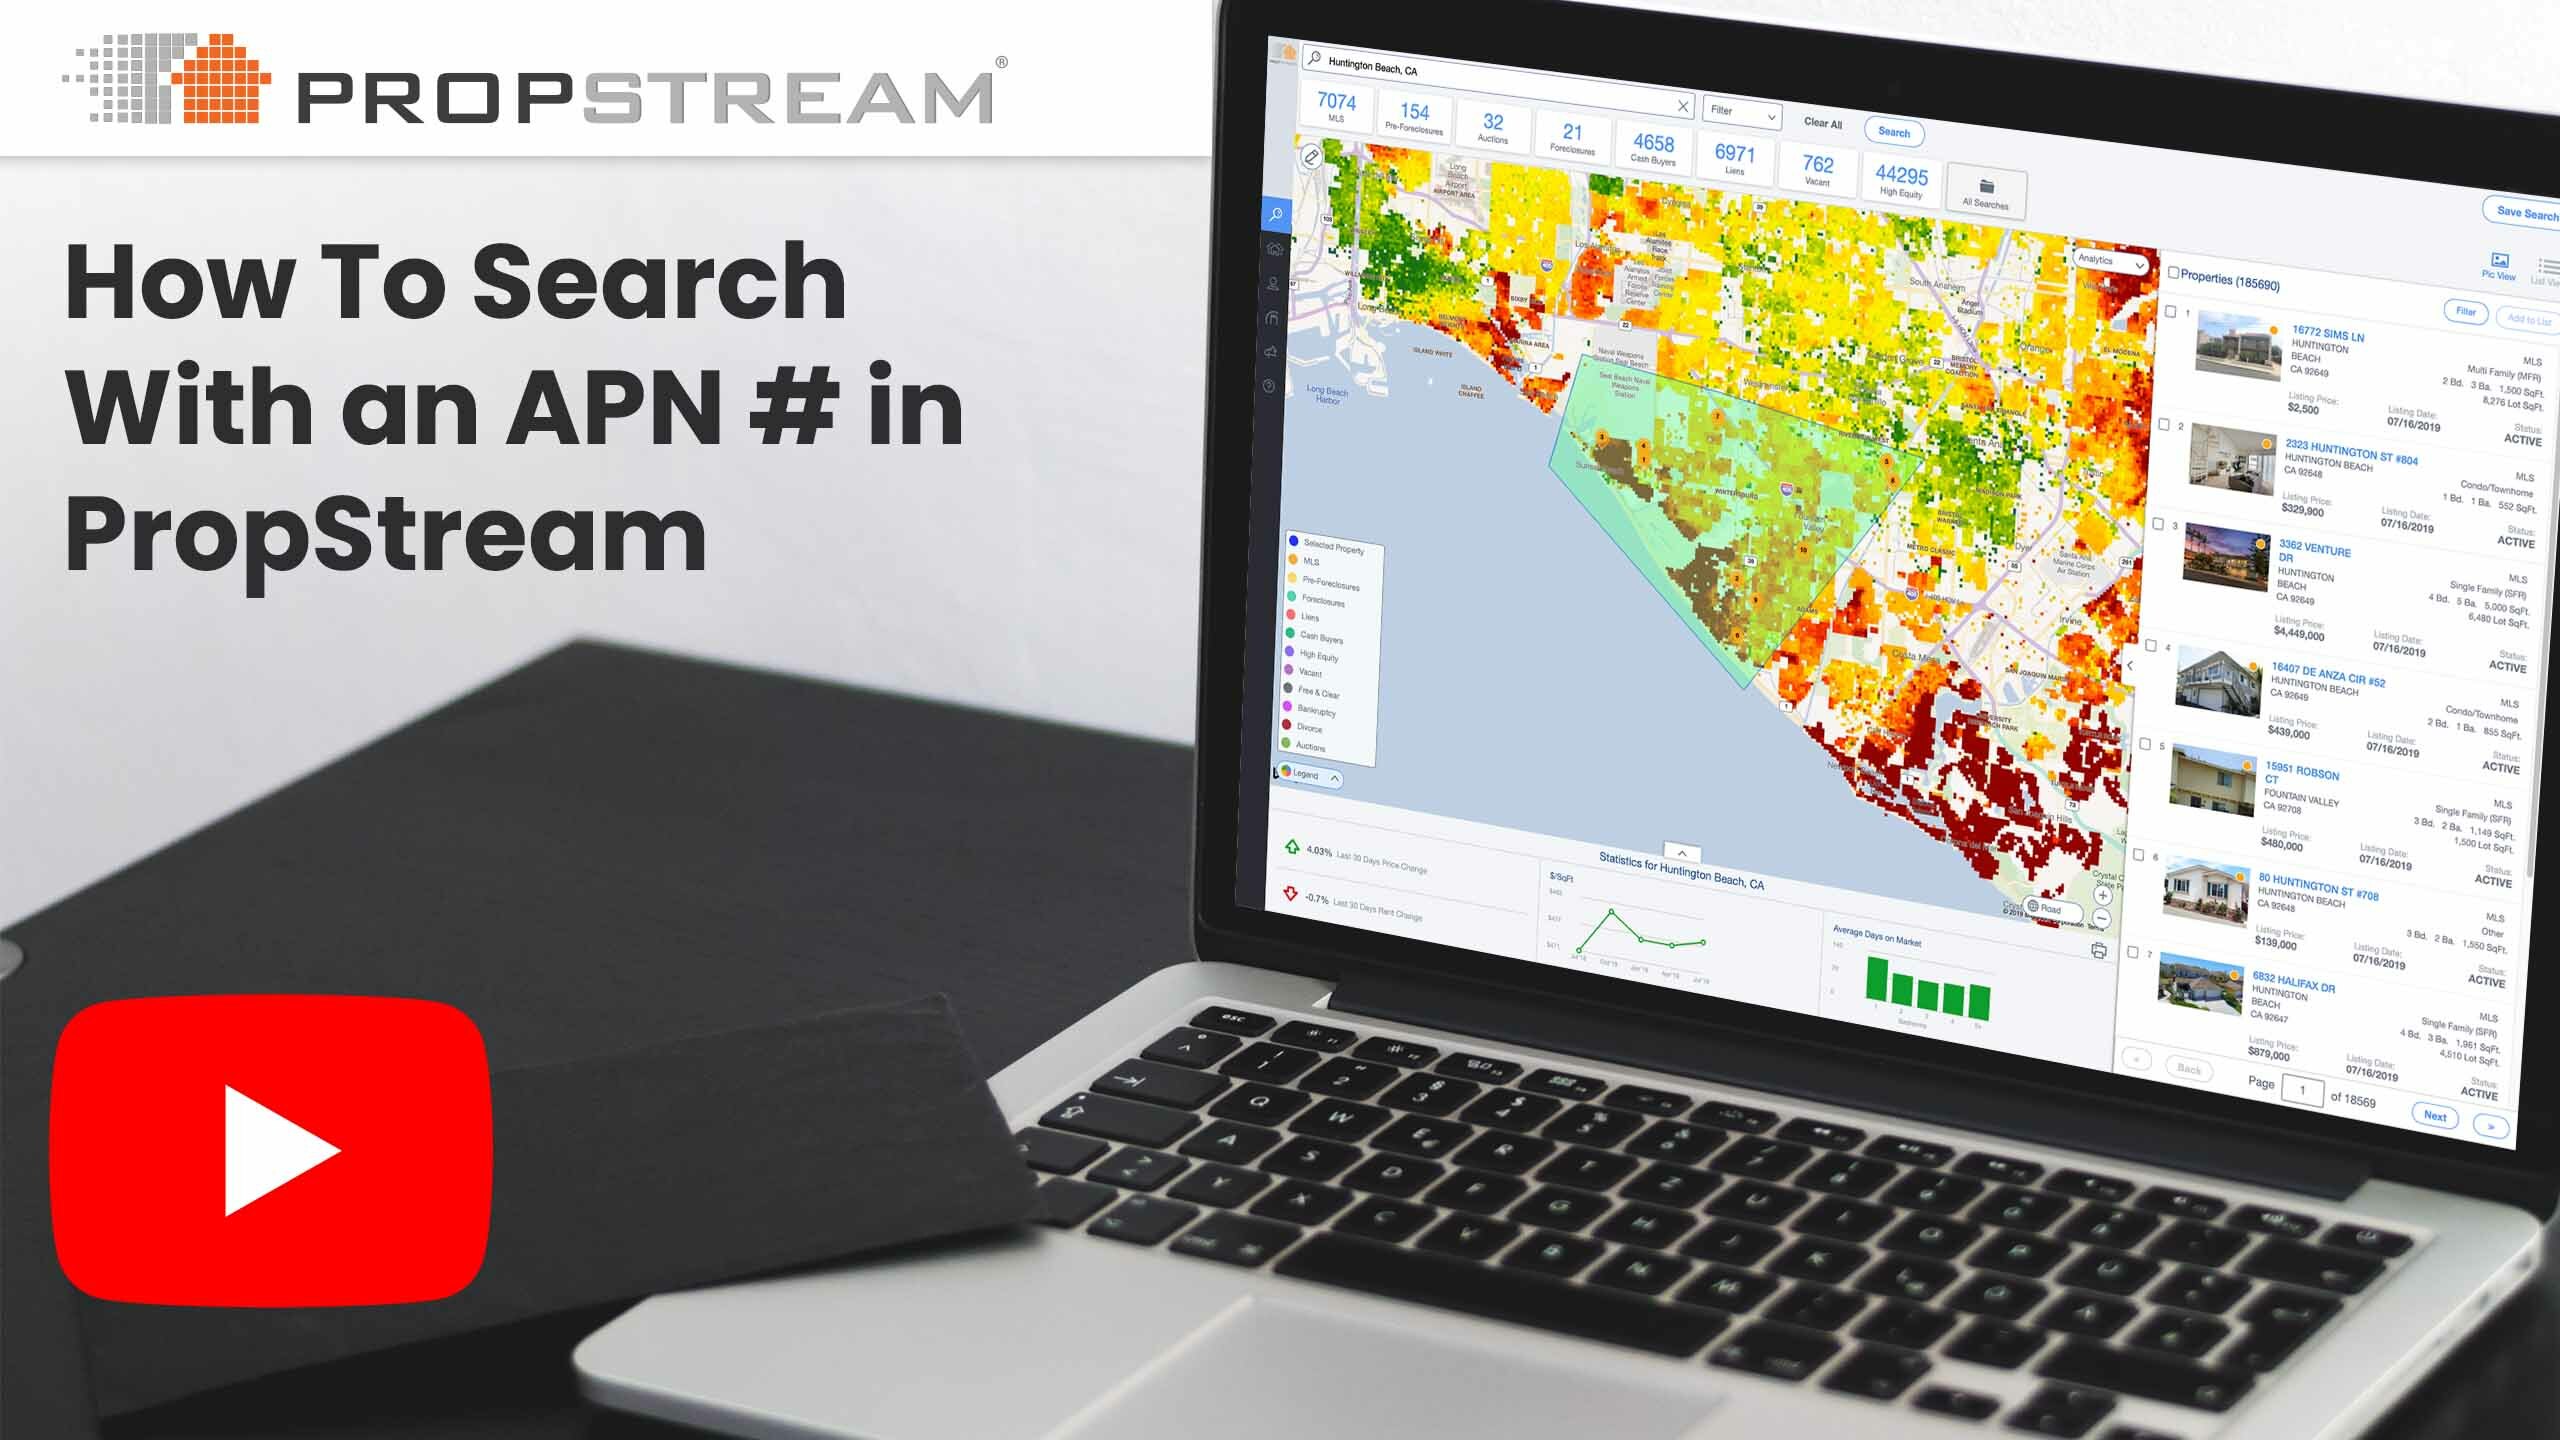 How To Search With an APN # in PropStream